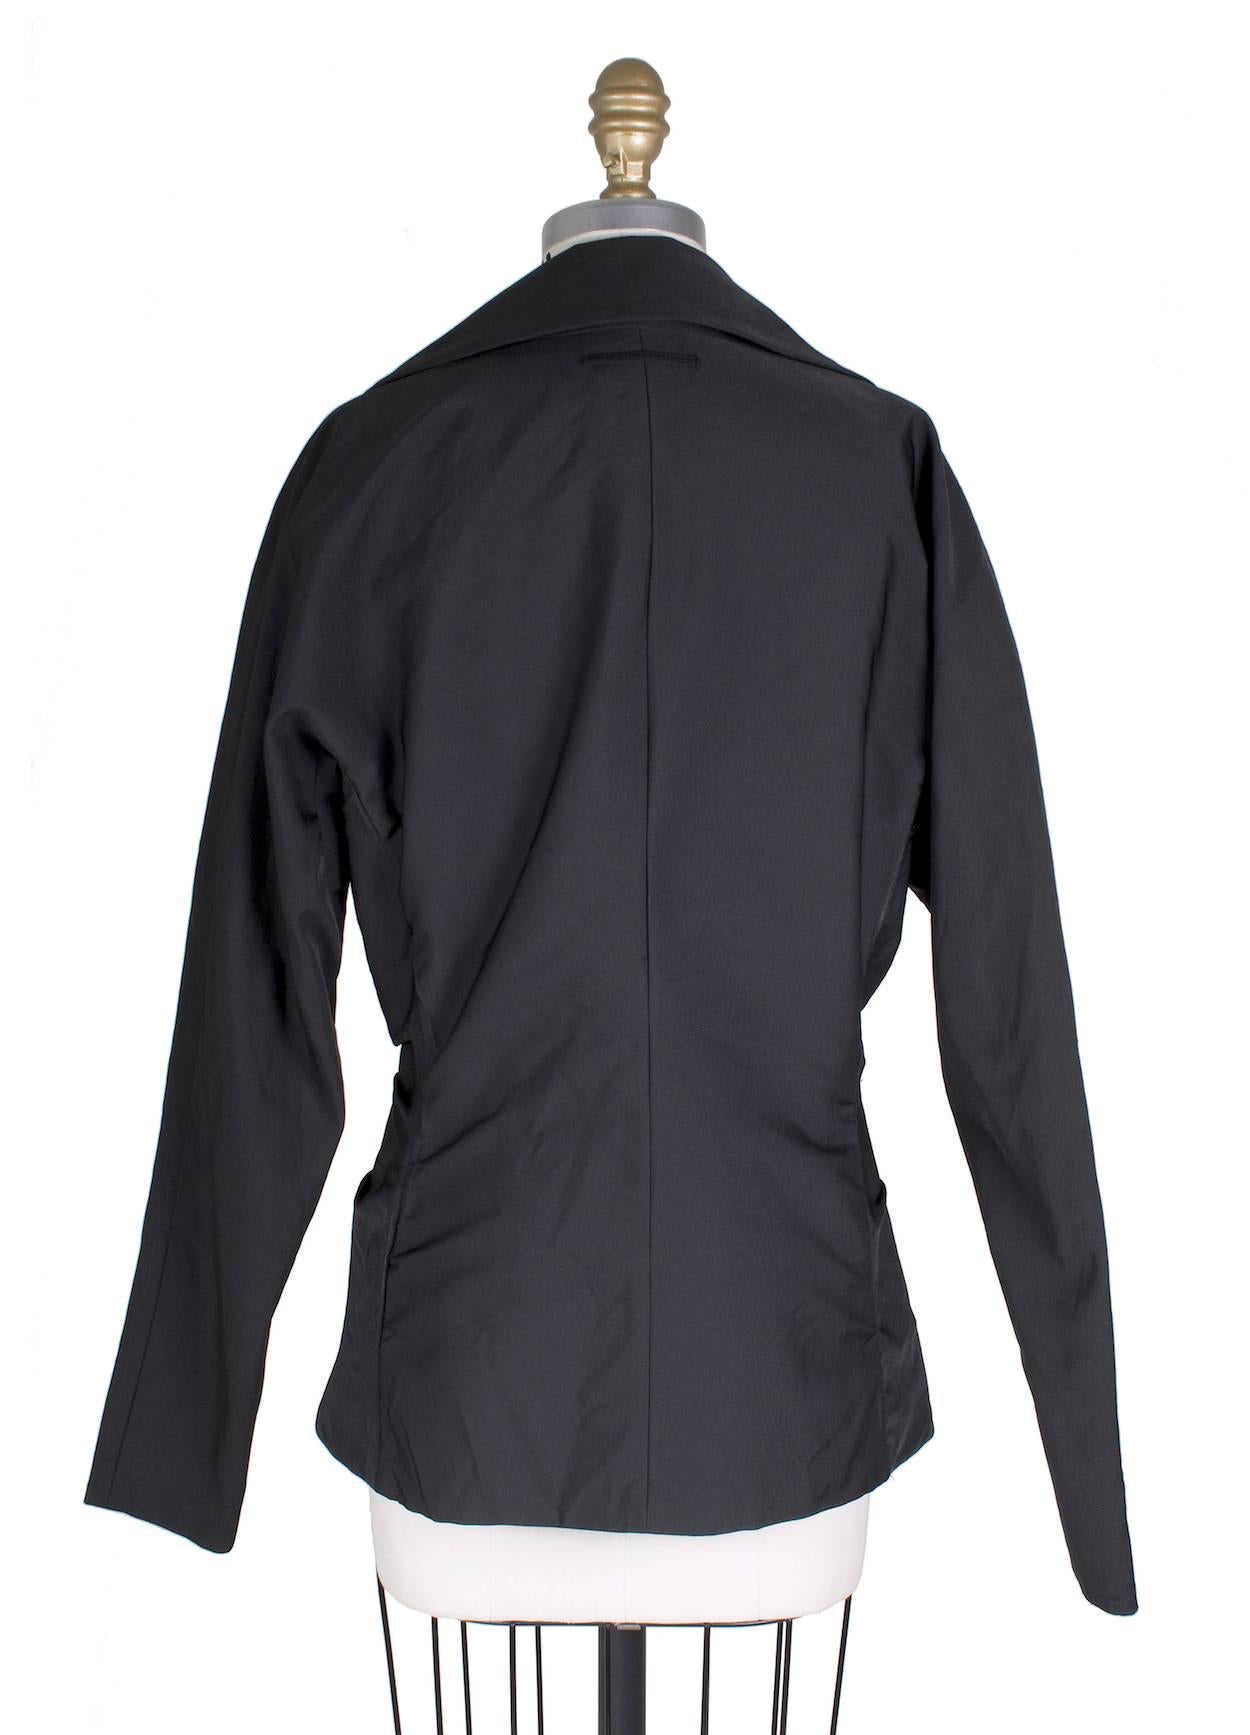 This is a contemporary jacket by Jean Paul Gaultier.  It features a knot in front and has a raglan shoulder and front zipper closure.